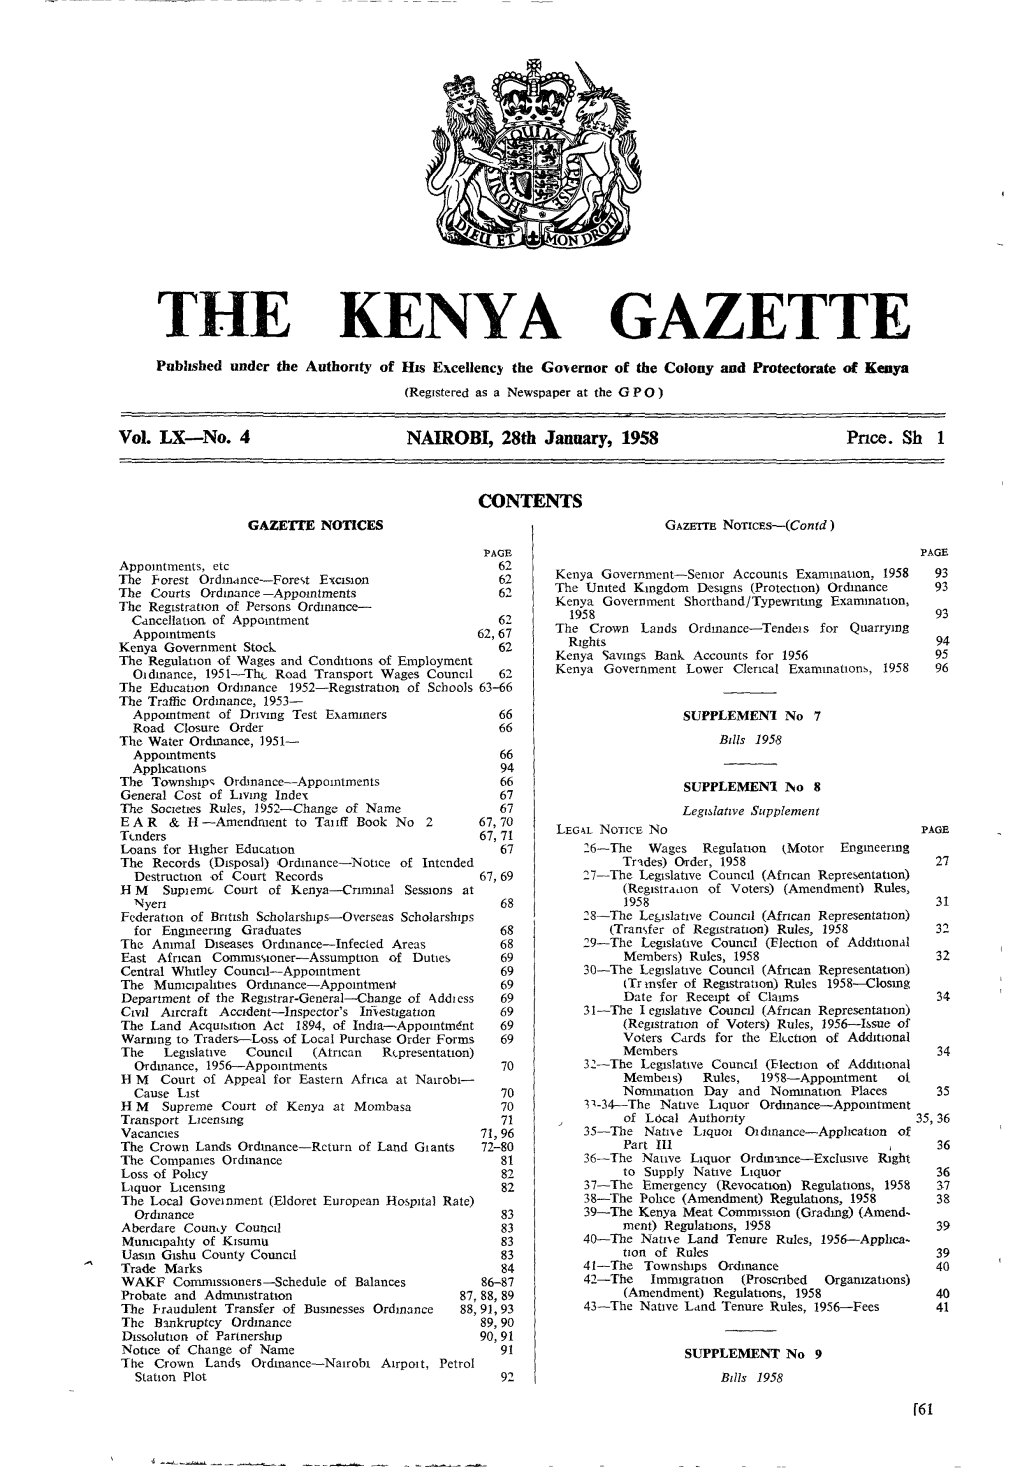 THE KENYA GAZETTE Publ~Shedunder the Author~Tyof HIS Excellency the Gorernor of the Colony and Protectorate of Kenya (Registered As a Newspaper at the GPO)